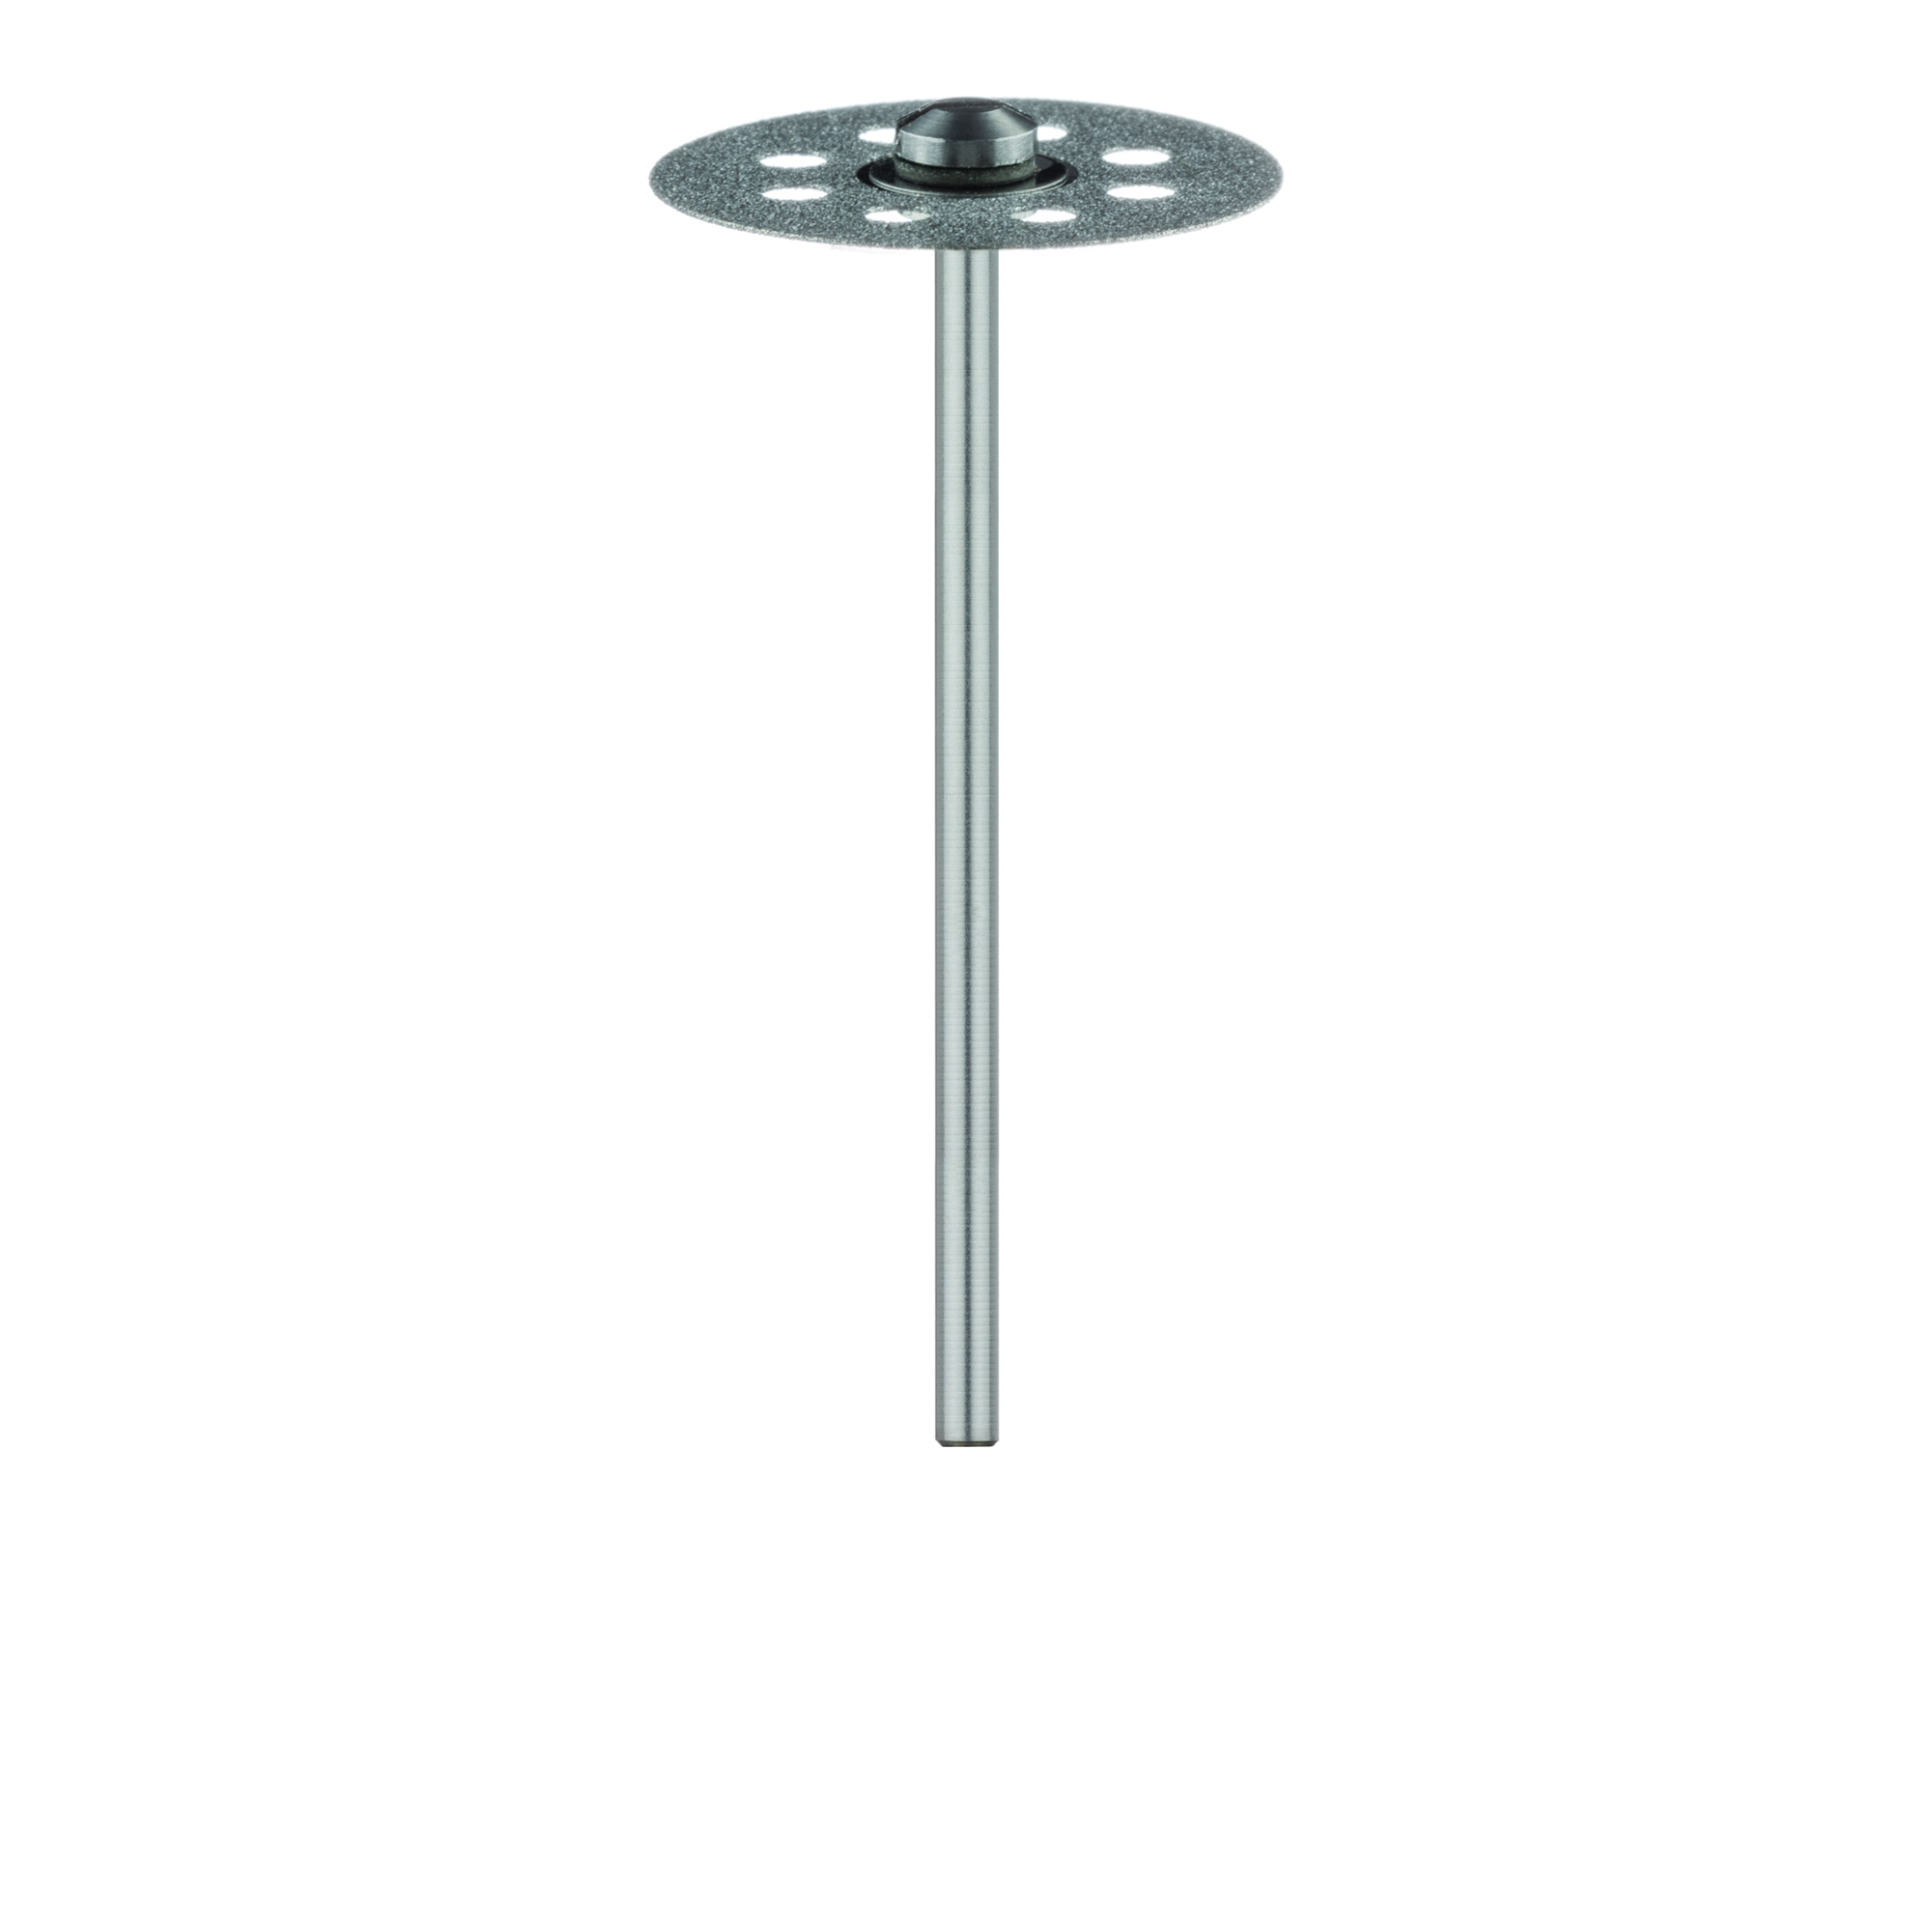 932DF-220-HP Diamond Bur, Perforated Disc, Double Sided, 0.25mm thick, 22 mm Diameter, Fine HP